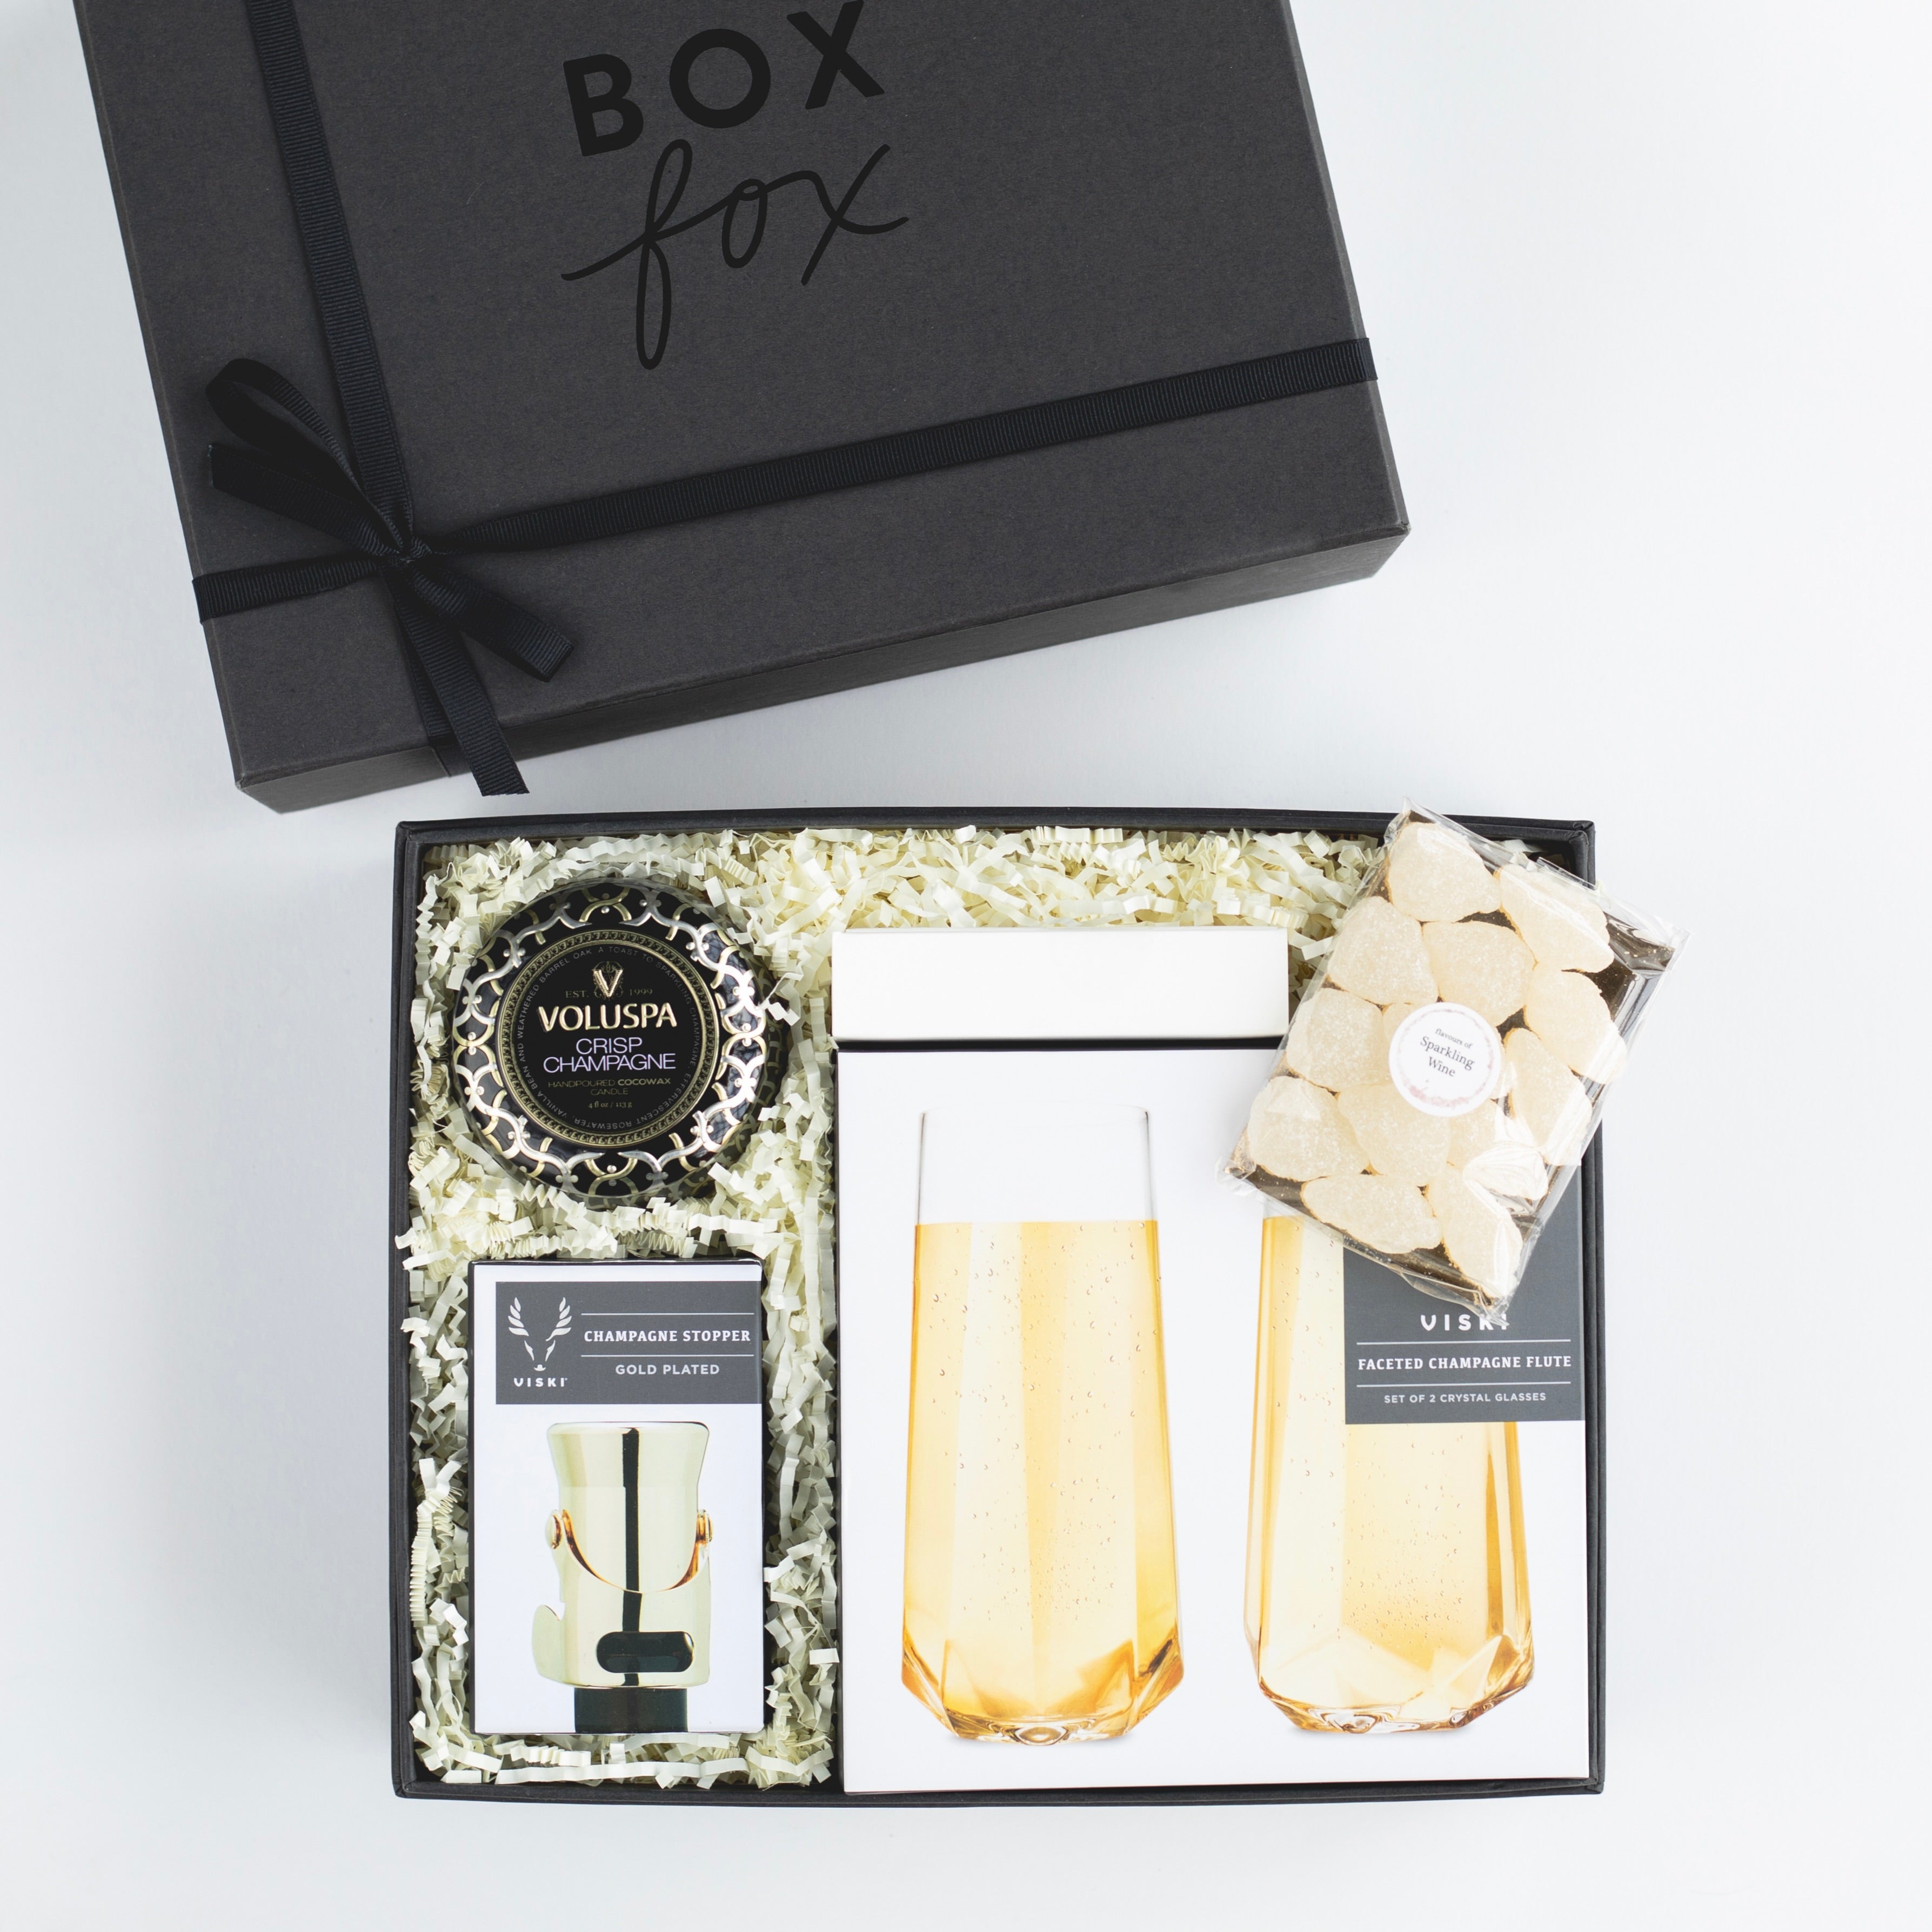 BOXFOX Pop Fizz Clink gift box also available in Matte Black.